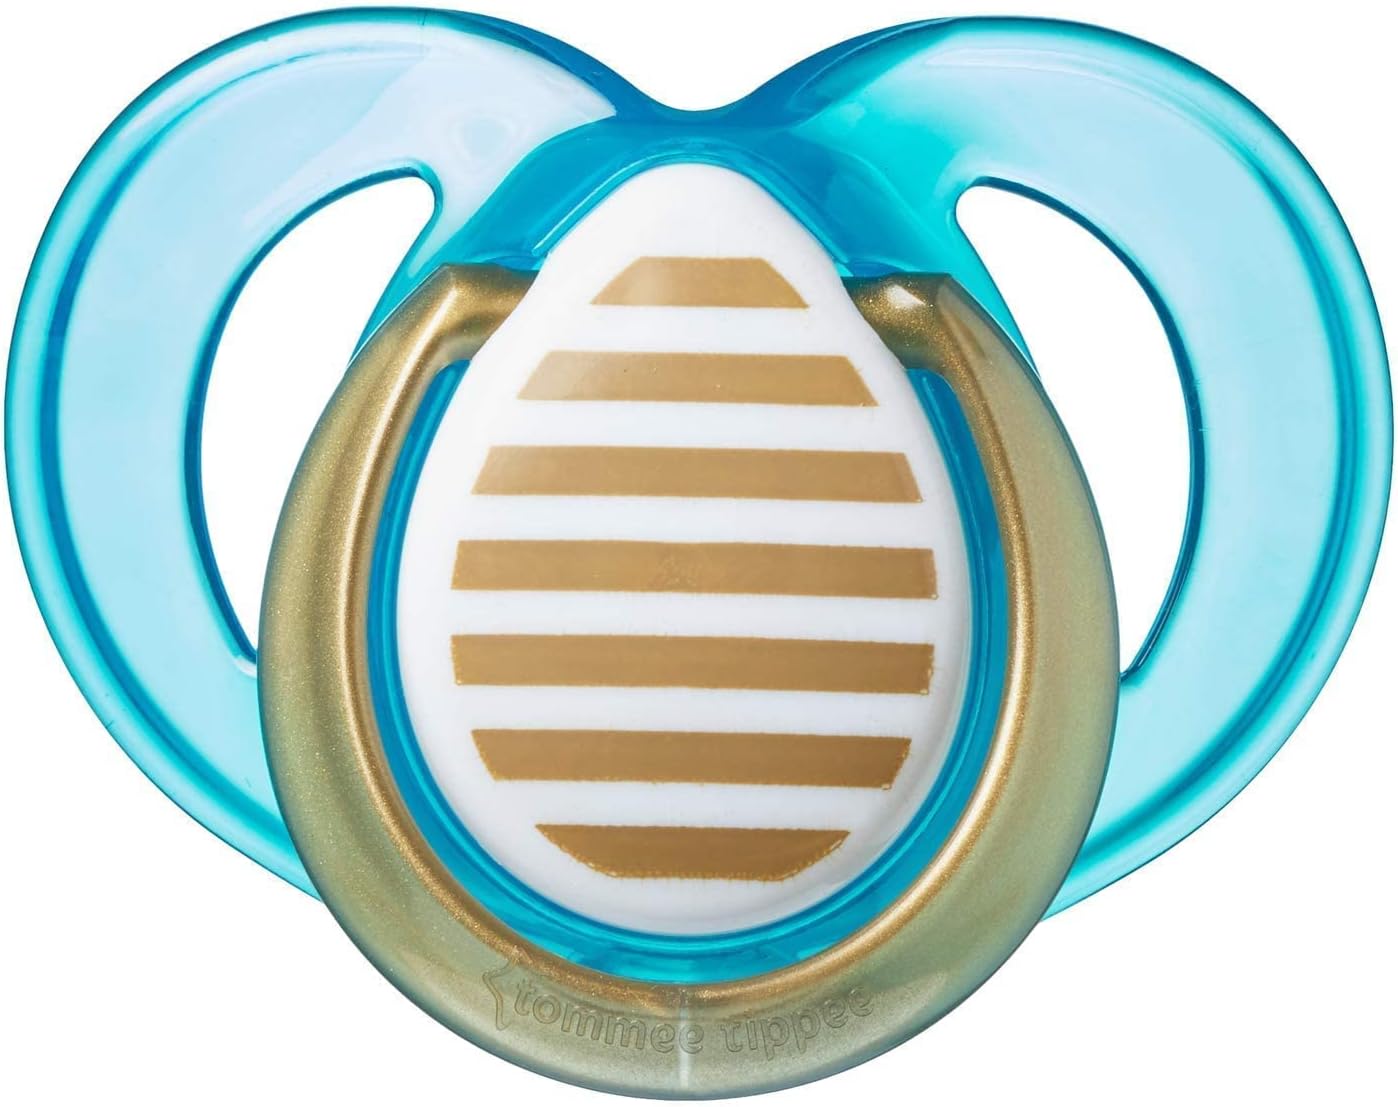 Tommee Tippee MODA Soother, (0-6 months), Pack of 2 -Boy